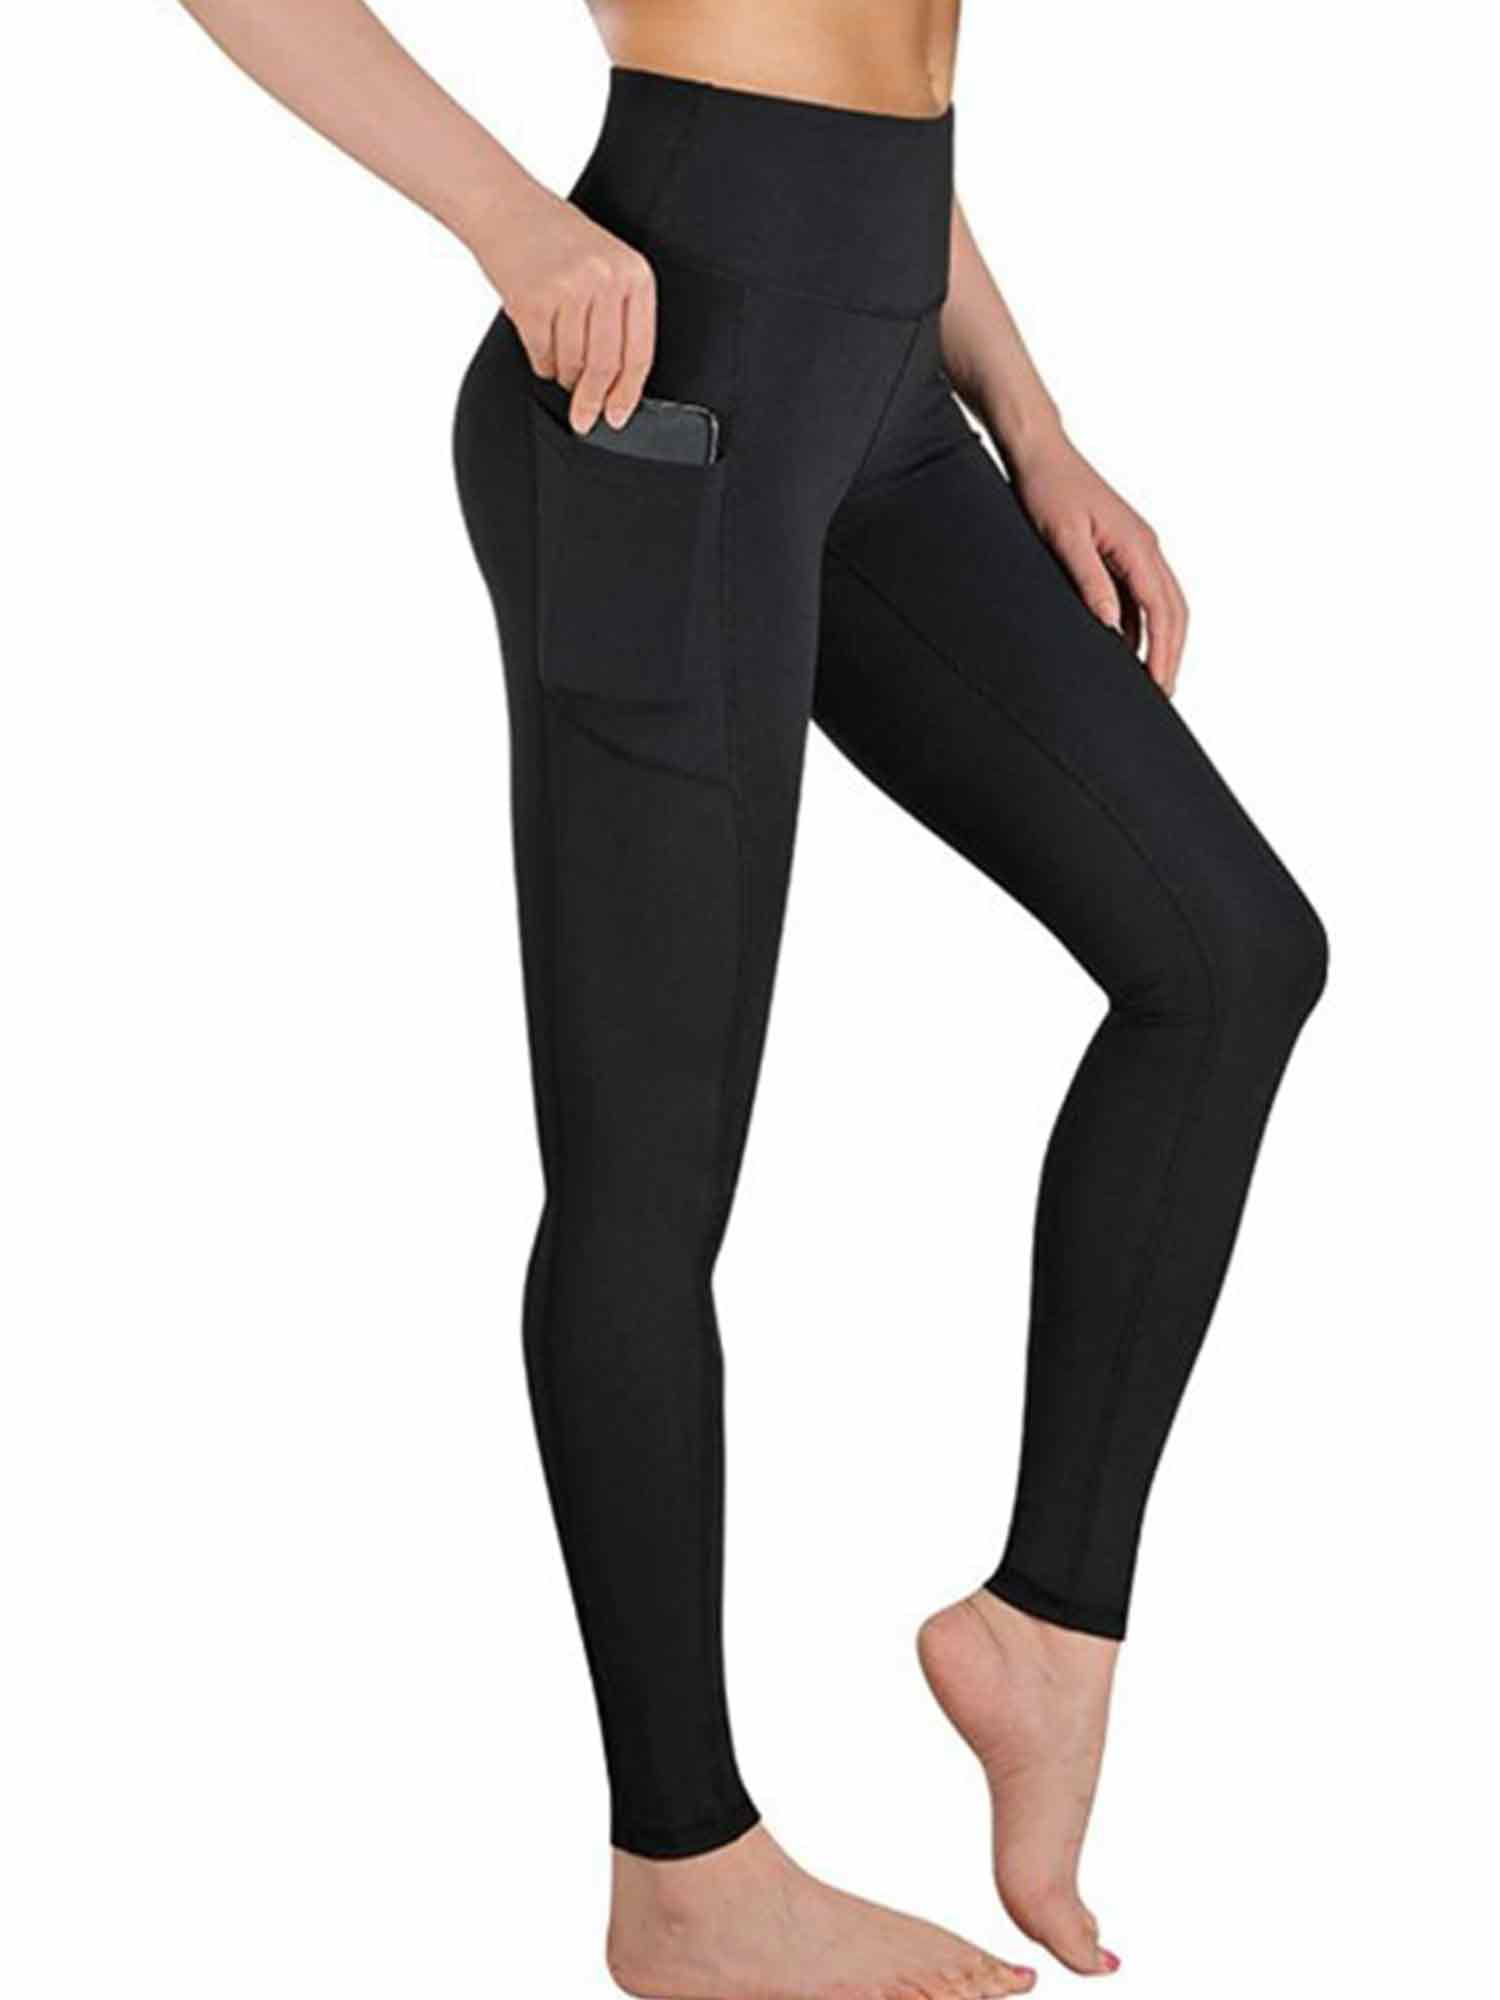 Women Yoga Pants Sport Leggings with Pockets Fitness GYM Running Stretch Trouser 